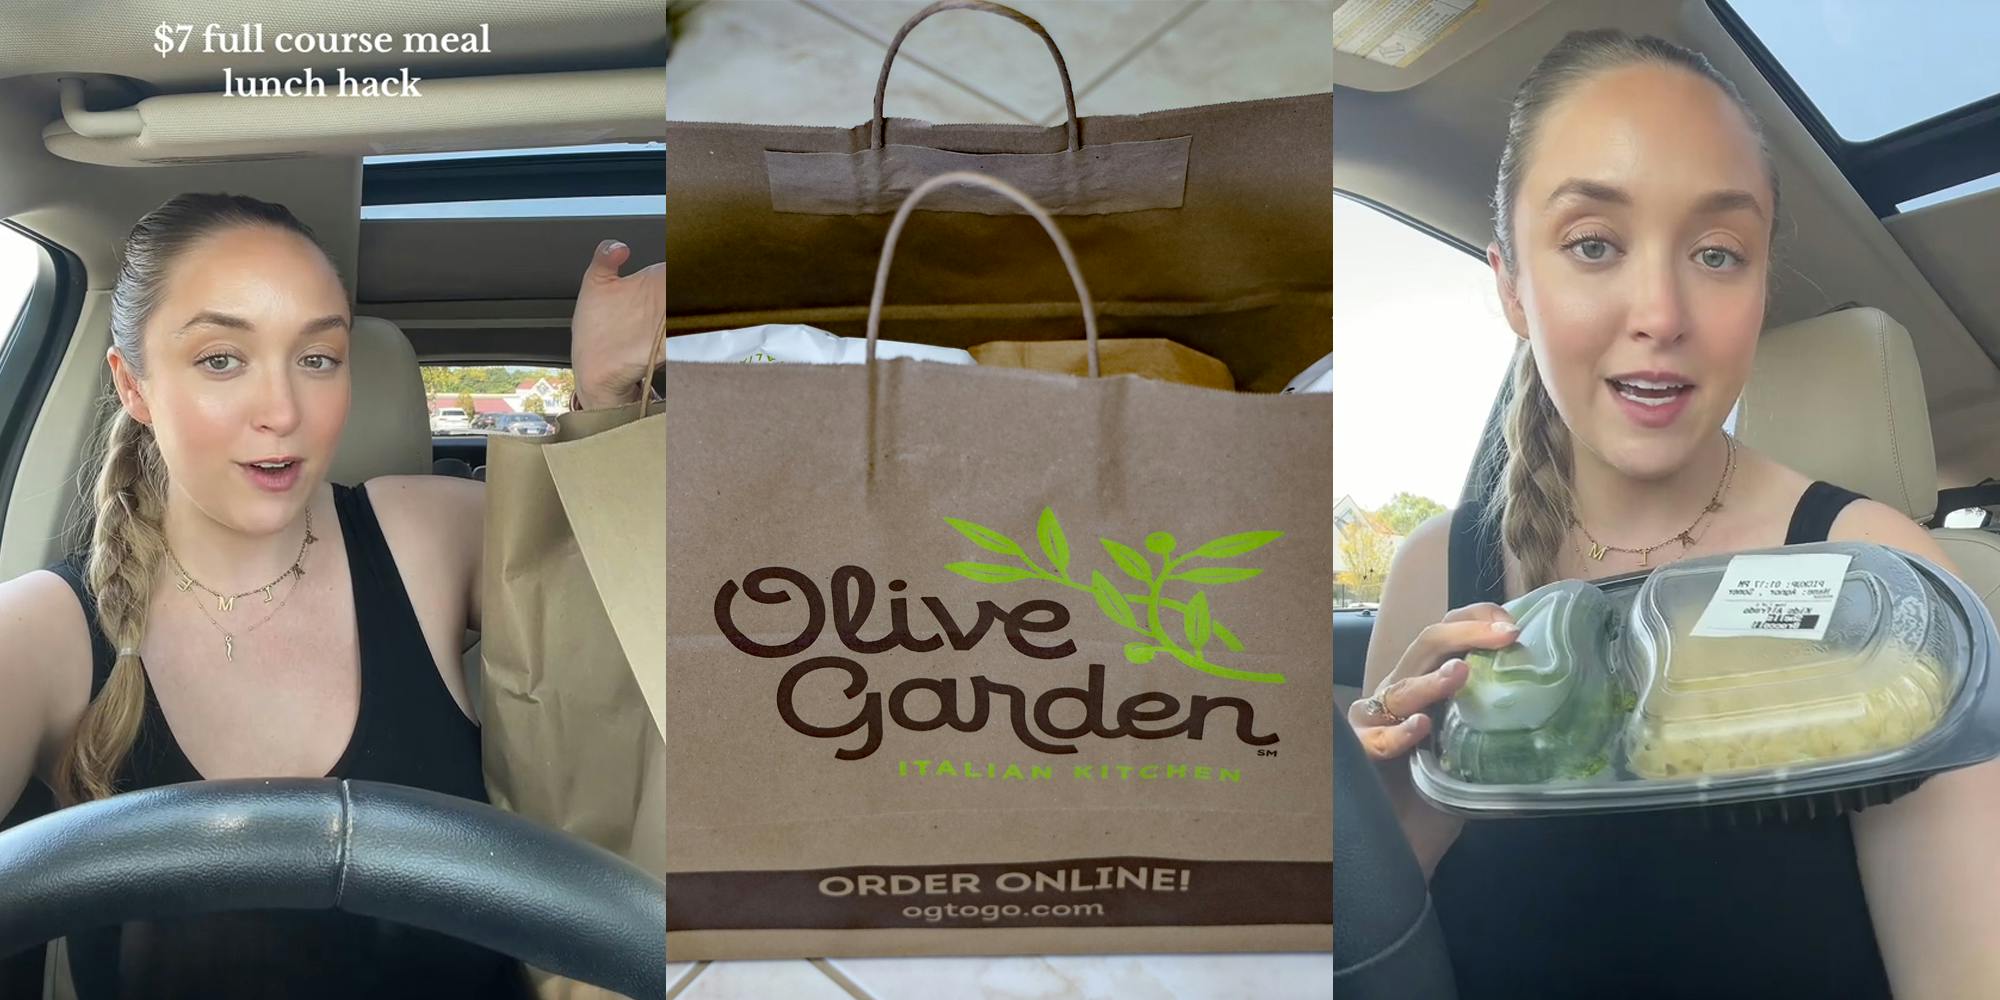 Olive Garden customer speaking in car with food and caption "$7 full course meal lunch hack (l) Olive Garden branded bag on floor (c) Olive Garden customer speaking in car with food (r)